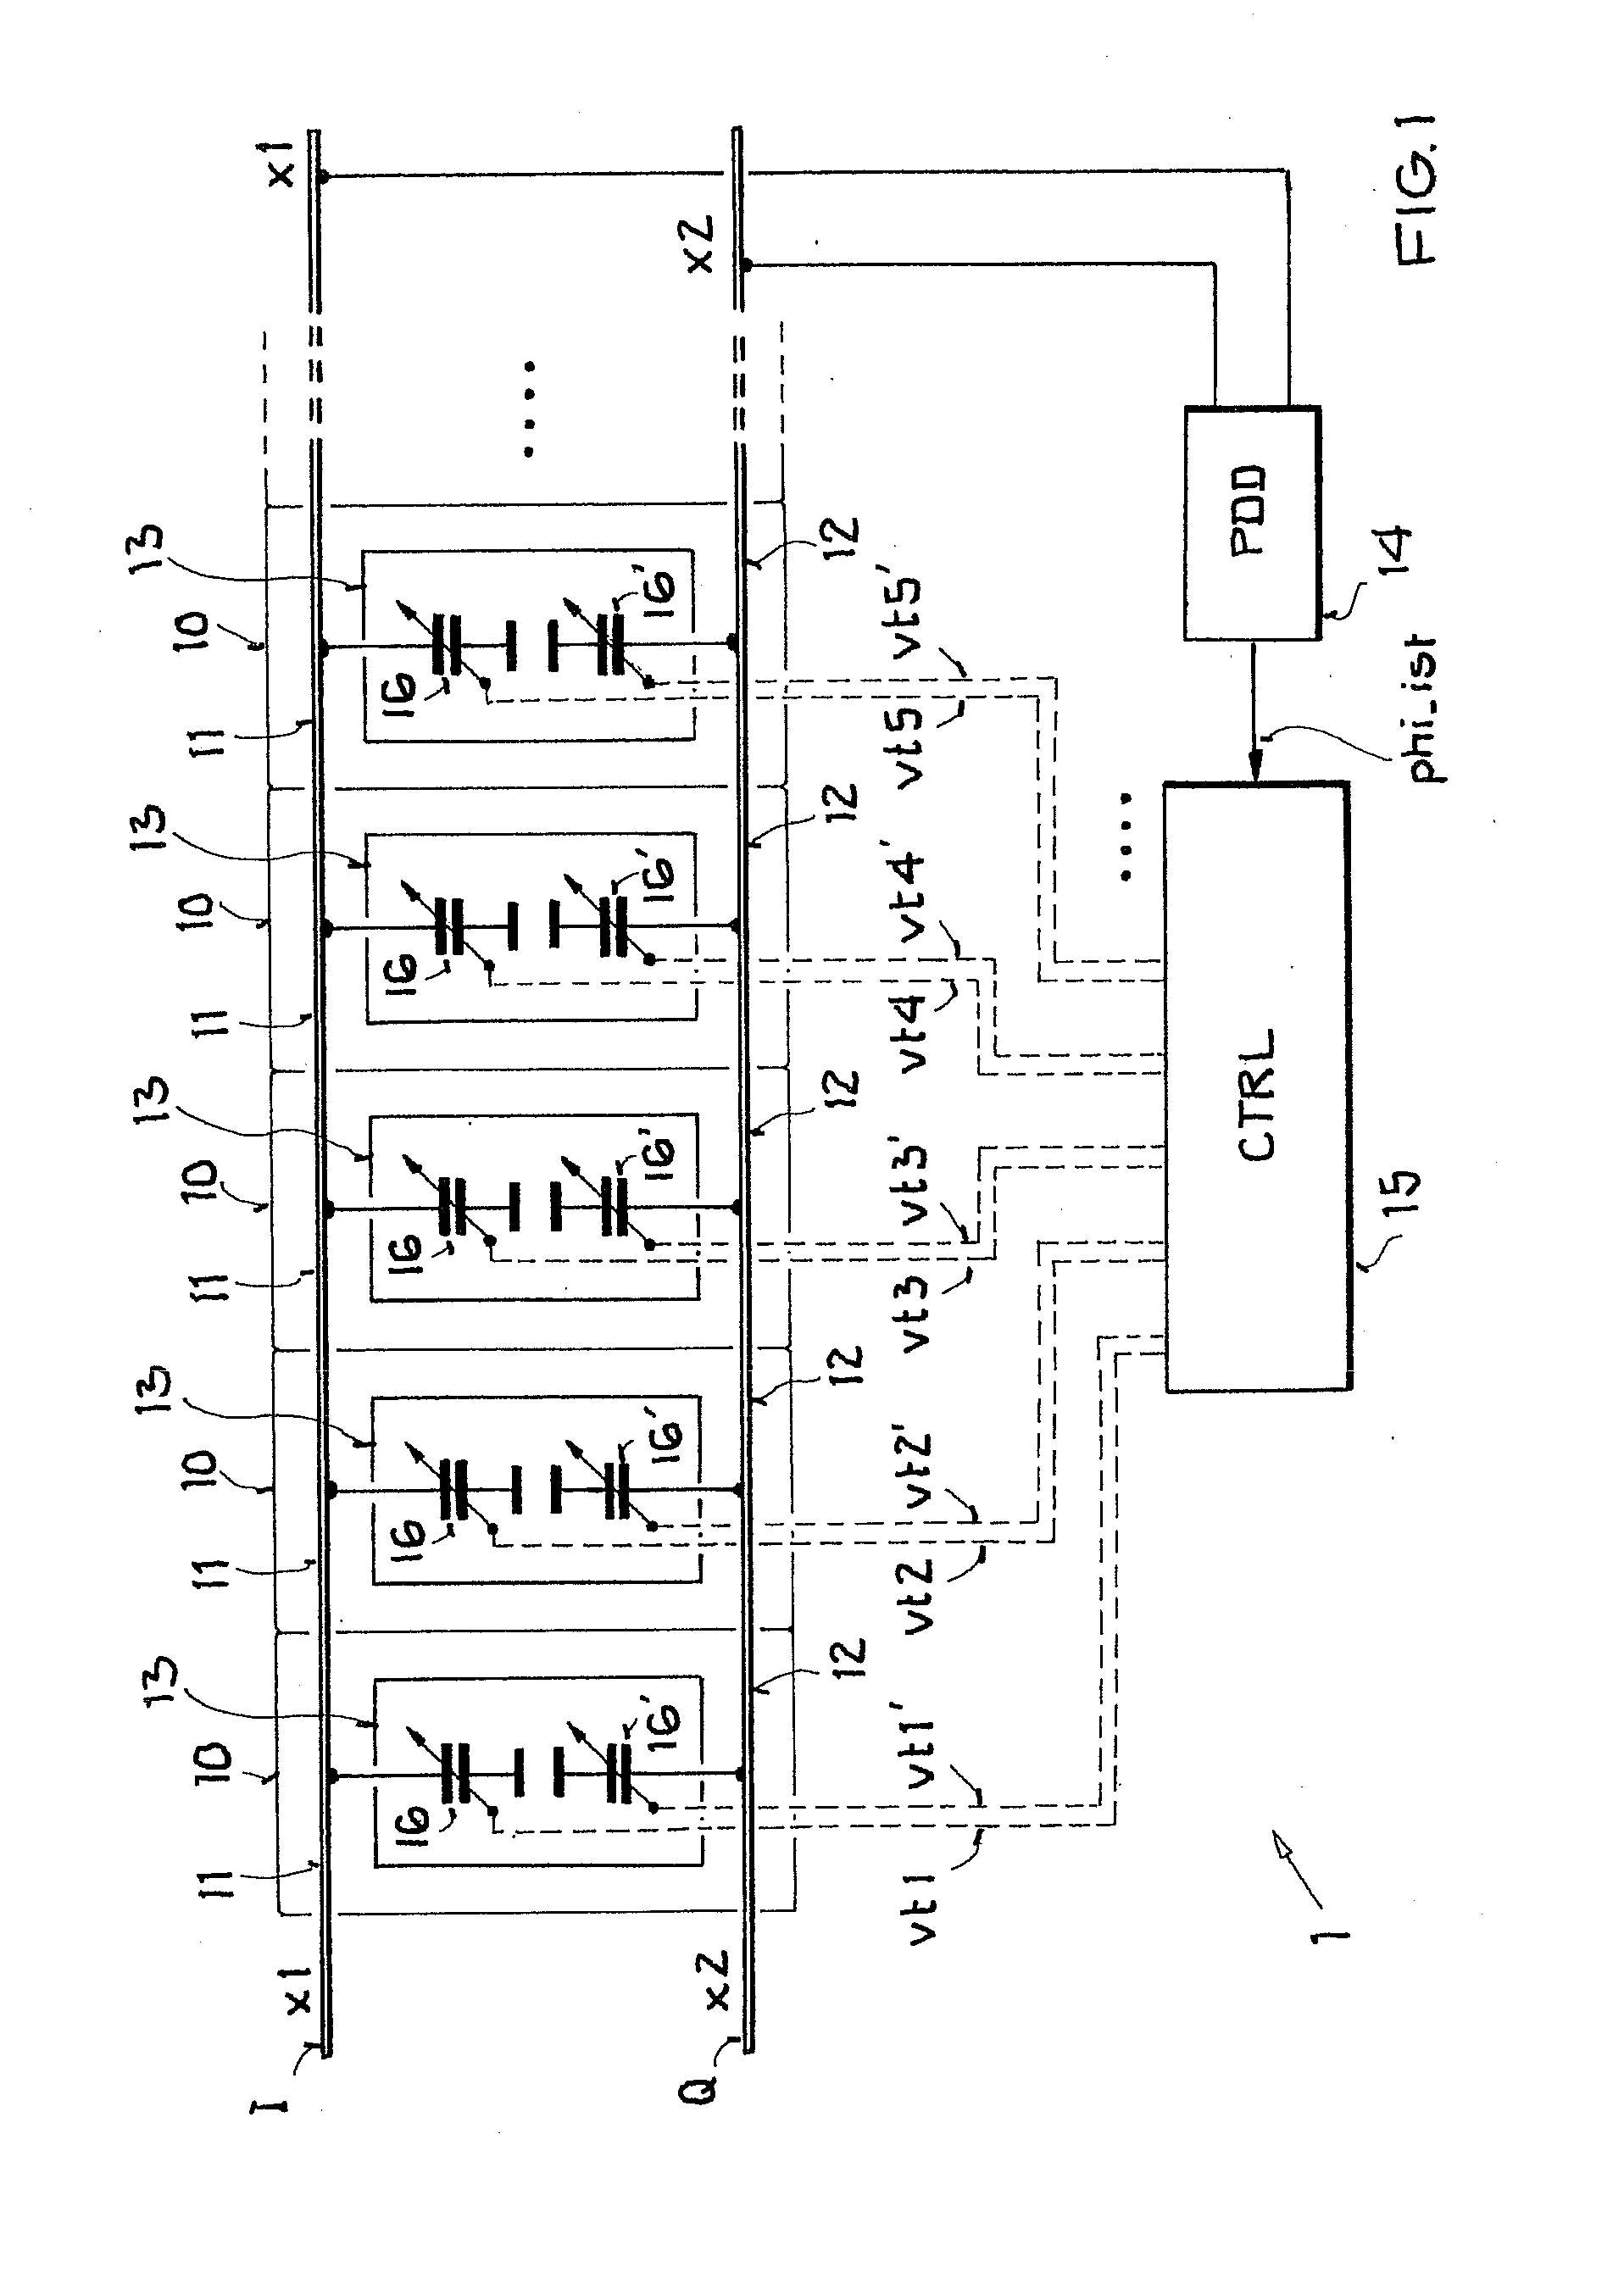 Integrated circuit arrangement to set a phase difference